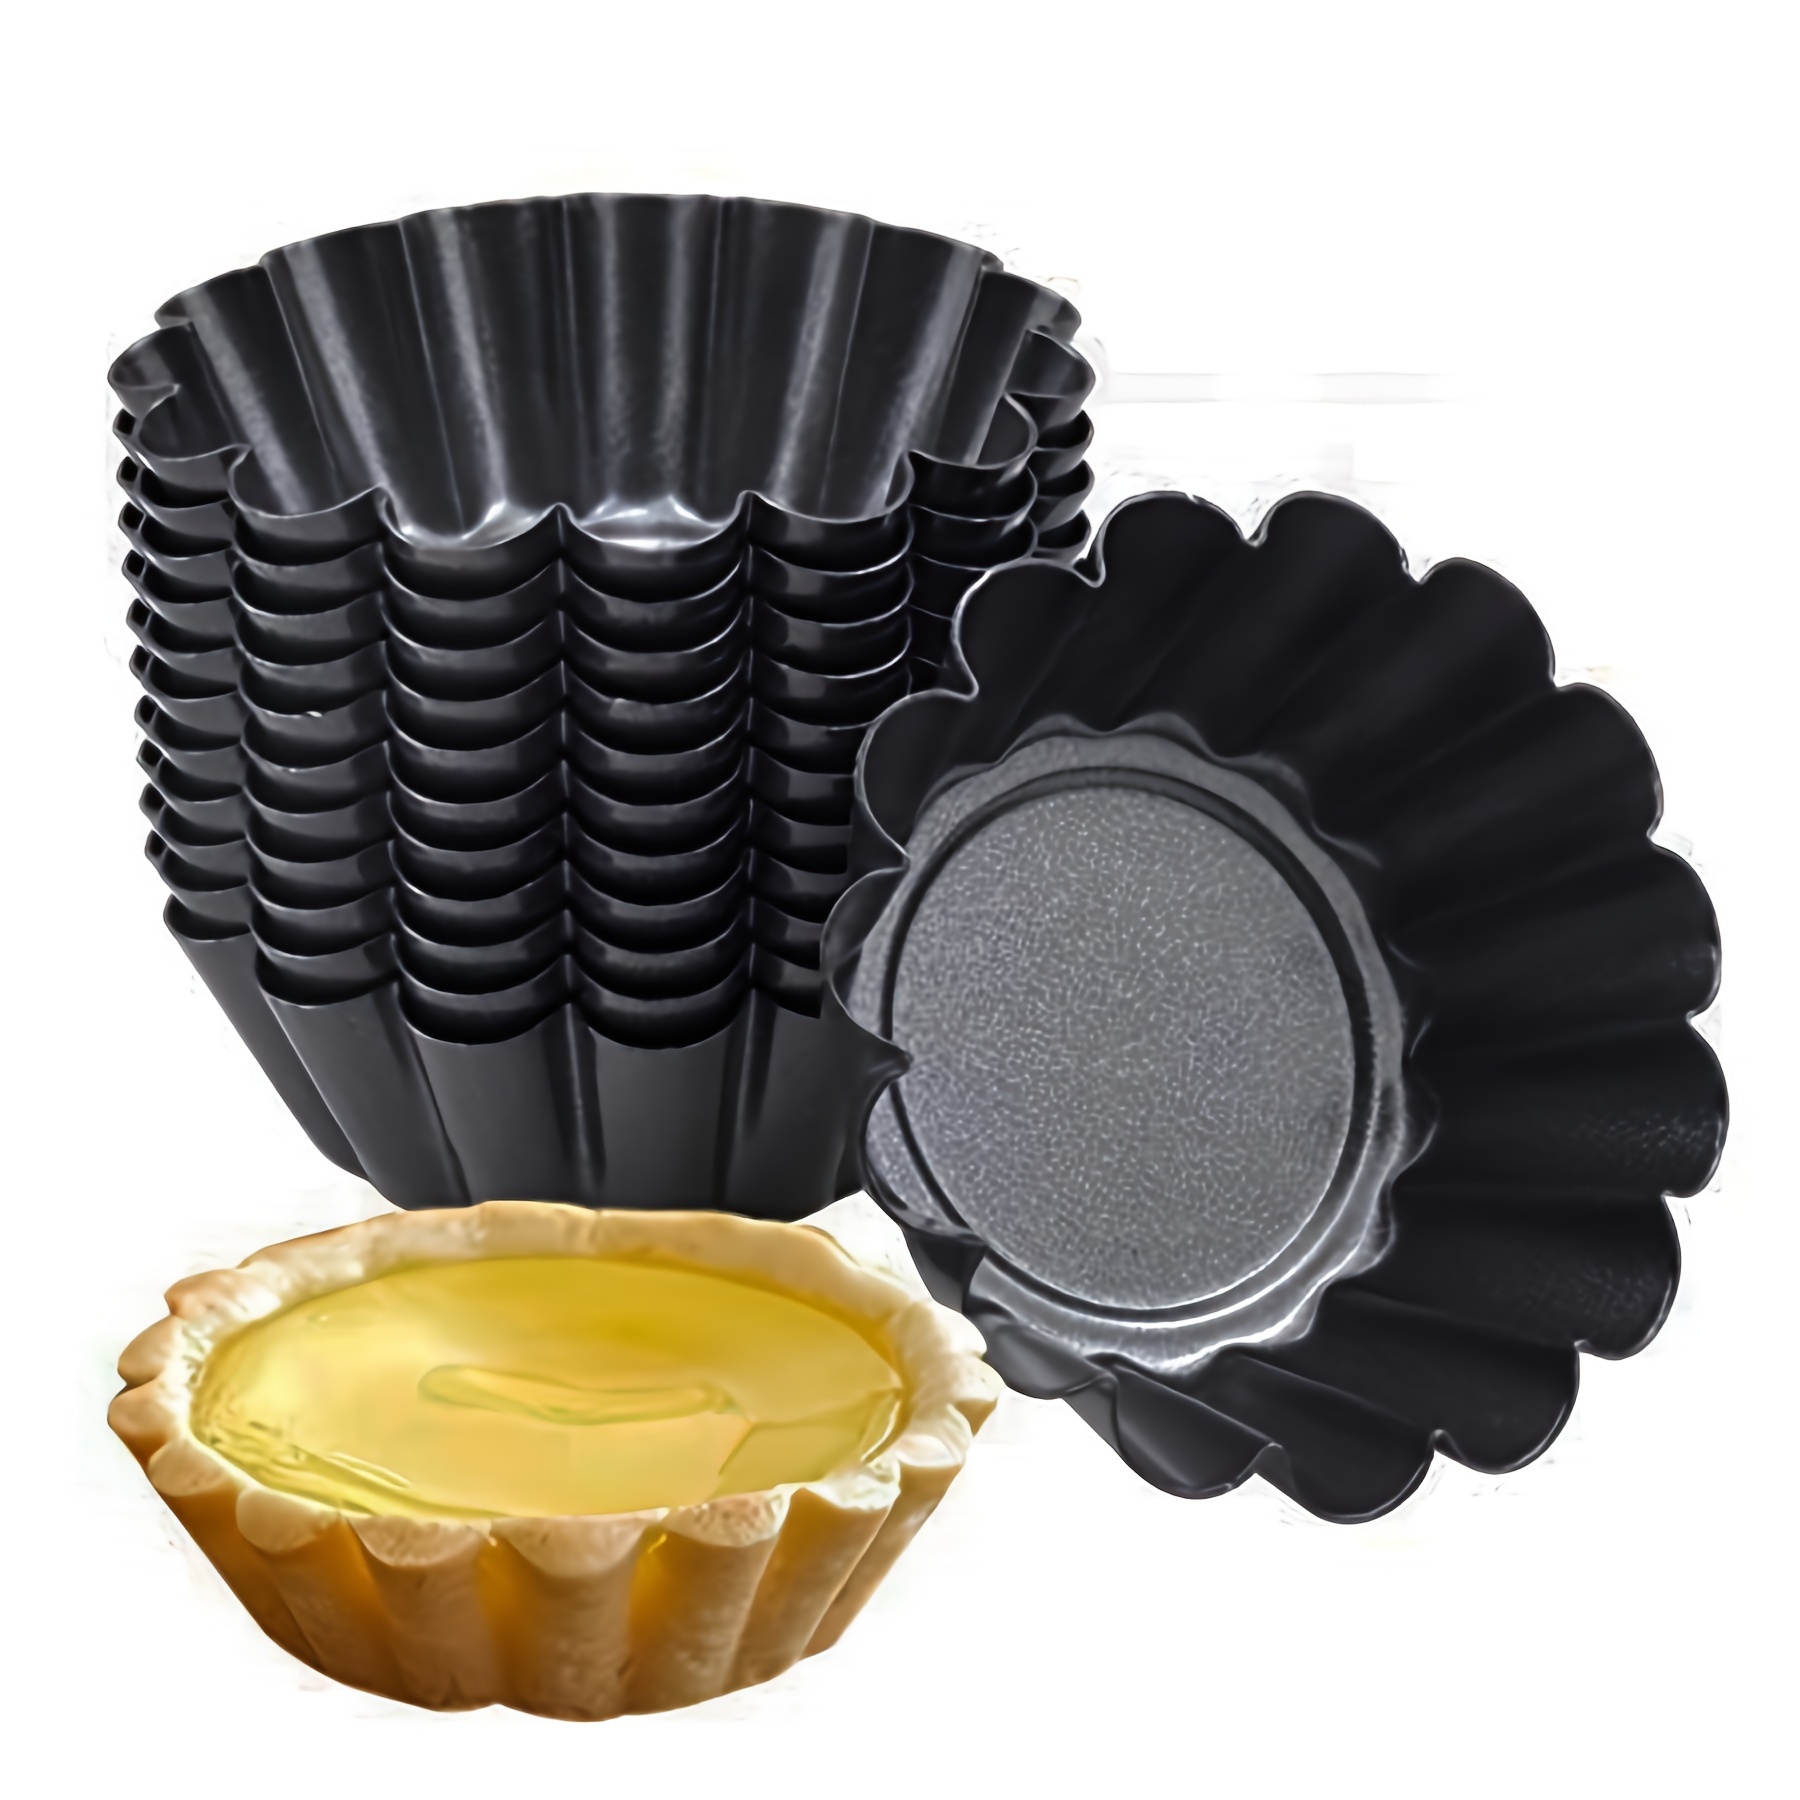 

12pcs, Egg Tart Mold, Non-stick Pan Carbon Steel Egg Tart Molds, Mini Pie Mould, Muffin Cupcake Pudding Baking Cup Maker - For Pies, Chinese Egg Tart, Cakes